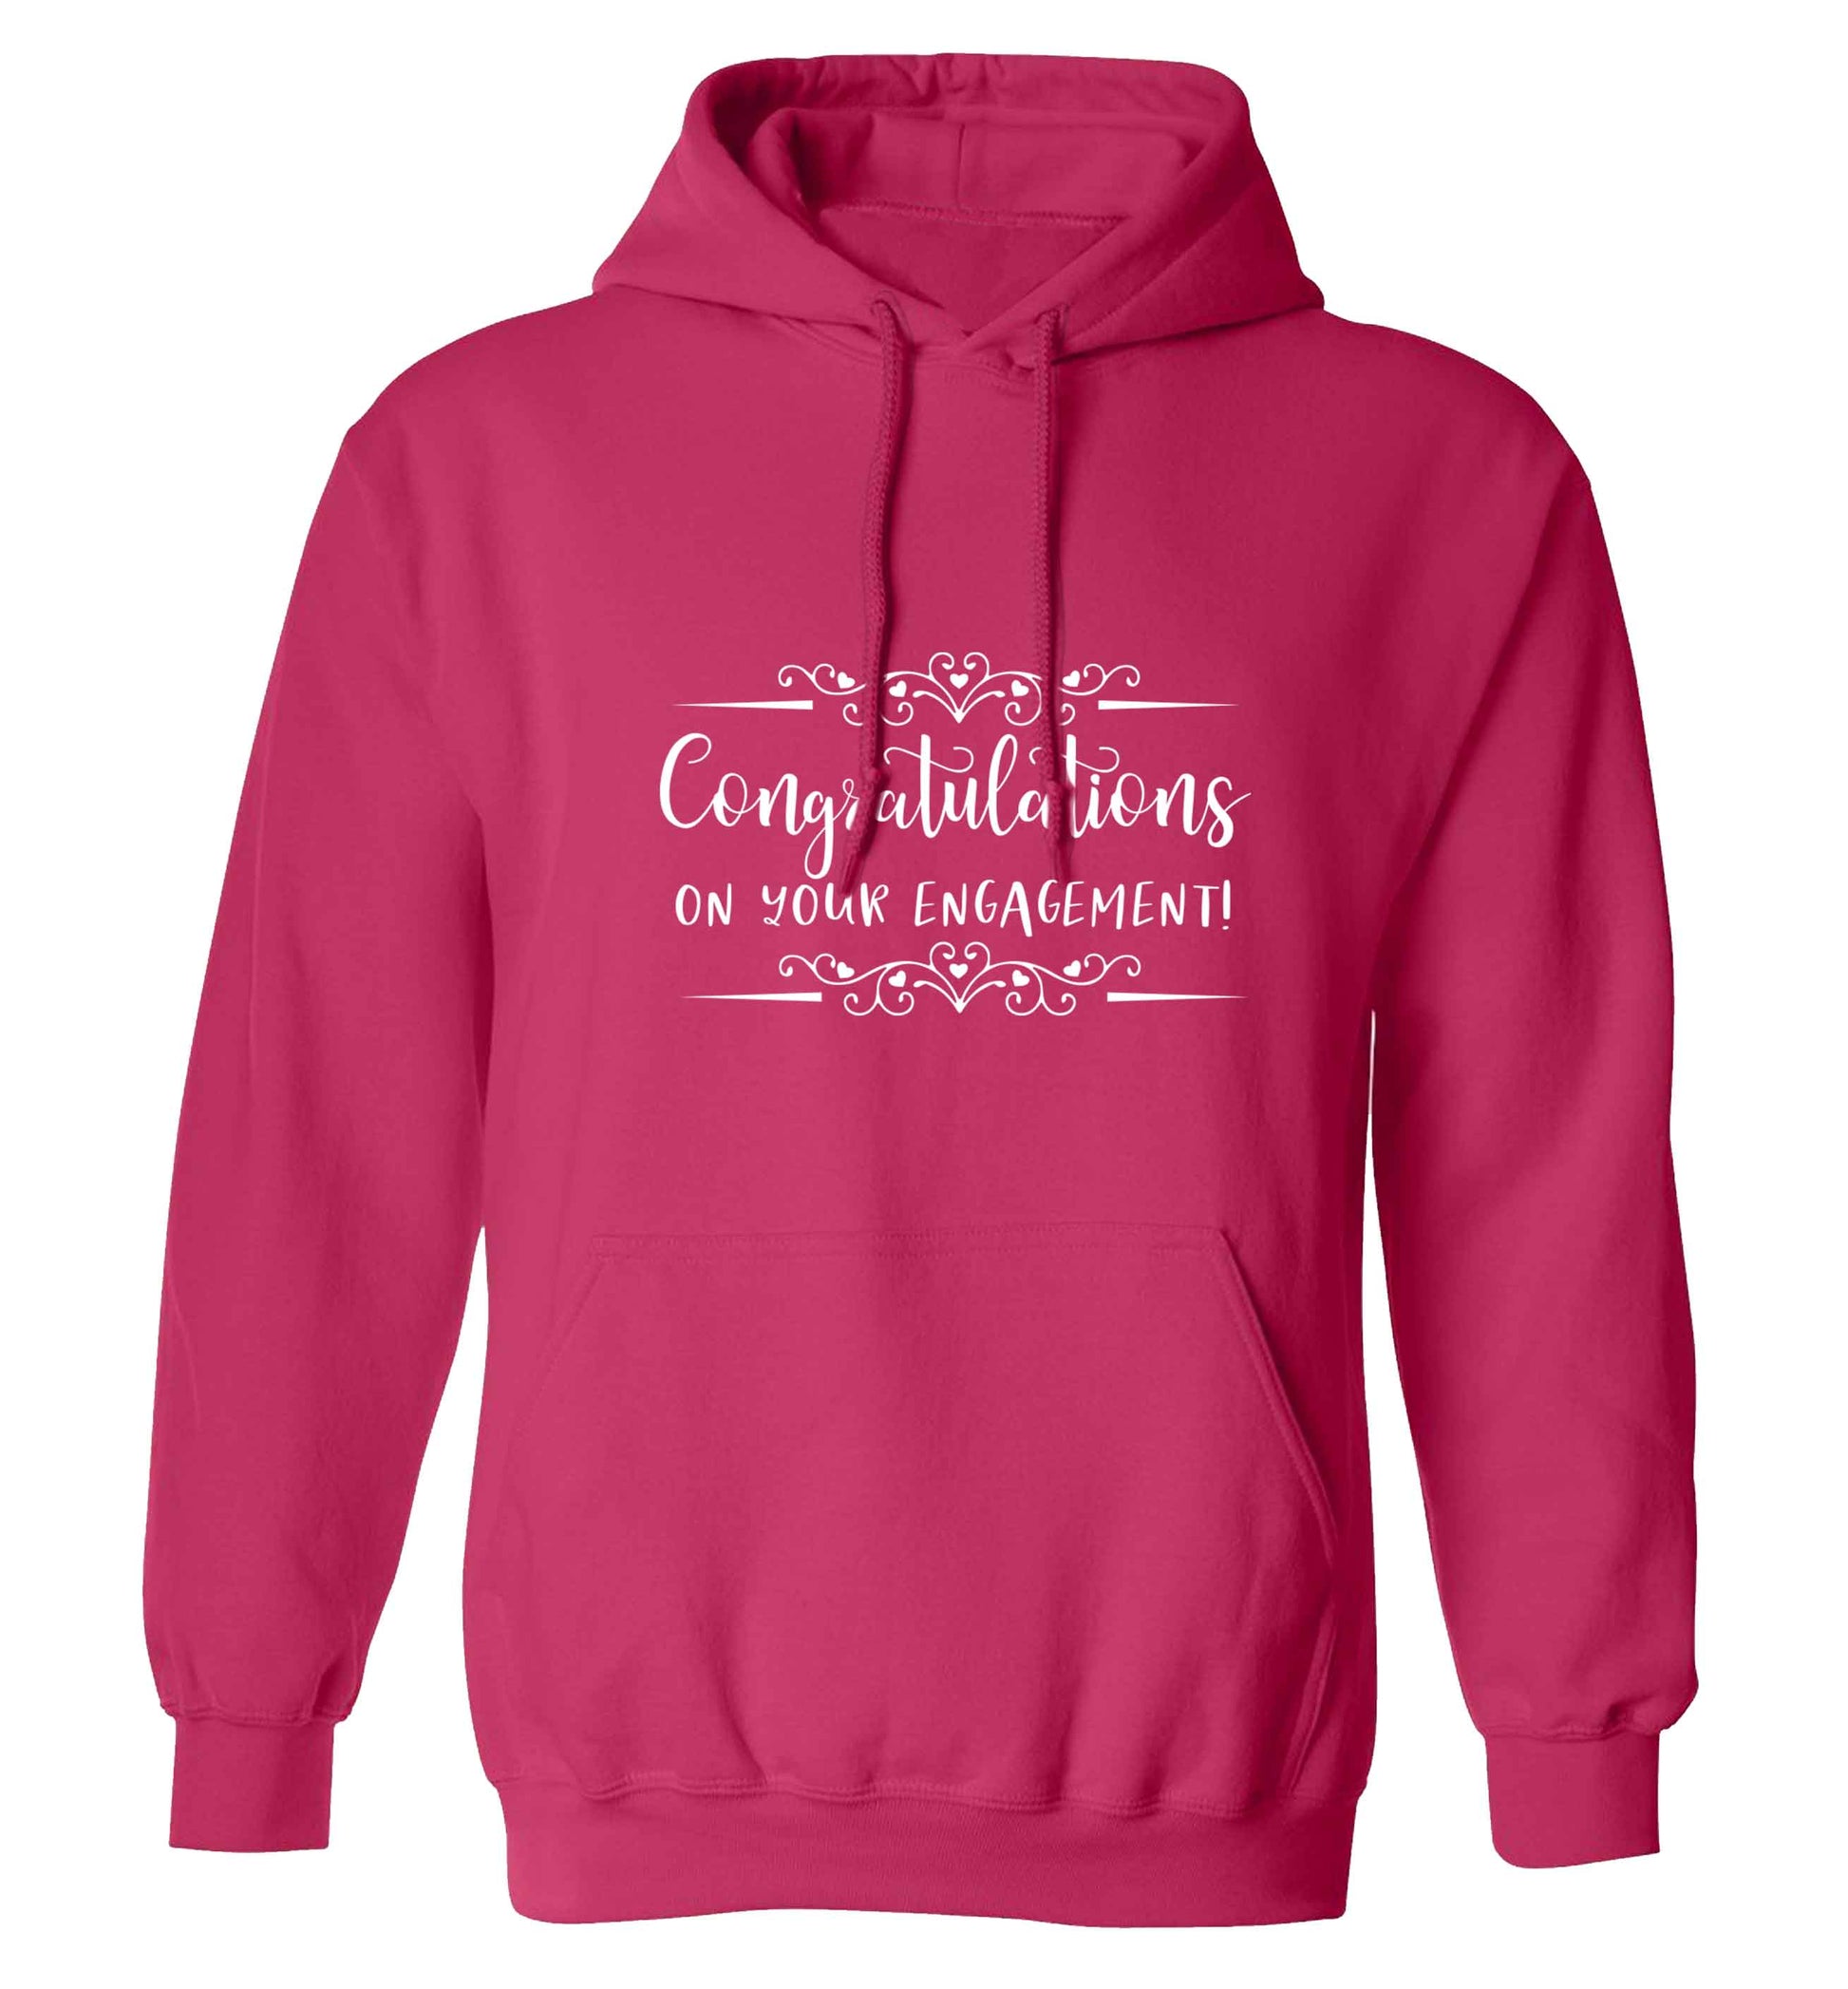 Congratulations on your engagement adults unisex pink hoodie 2XL